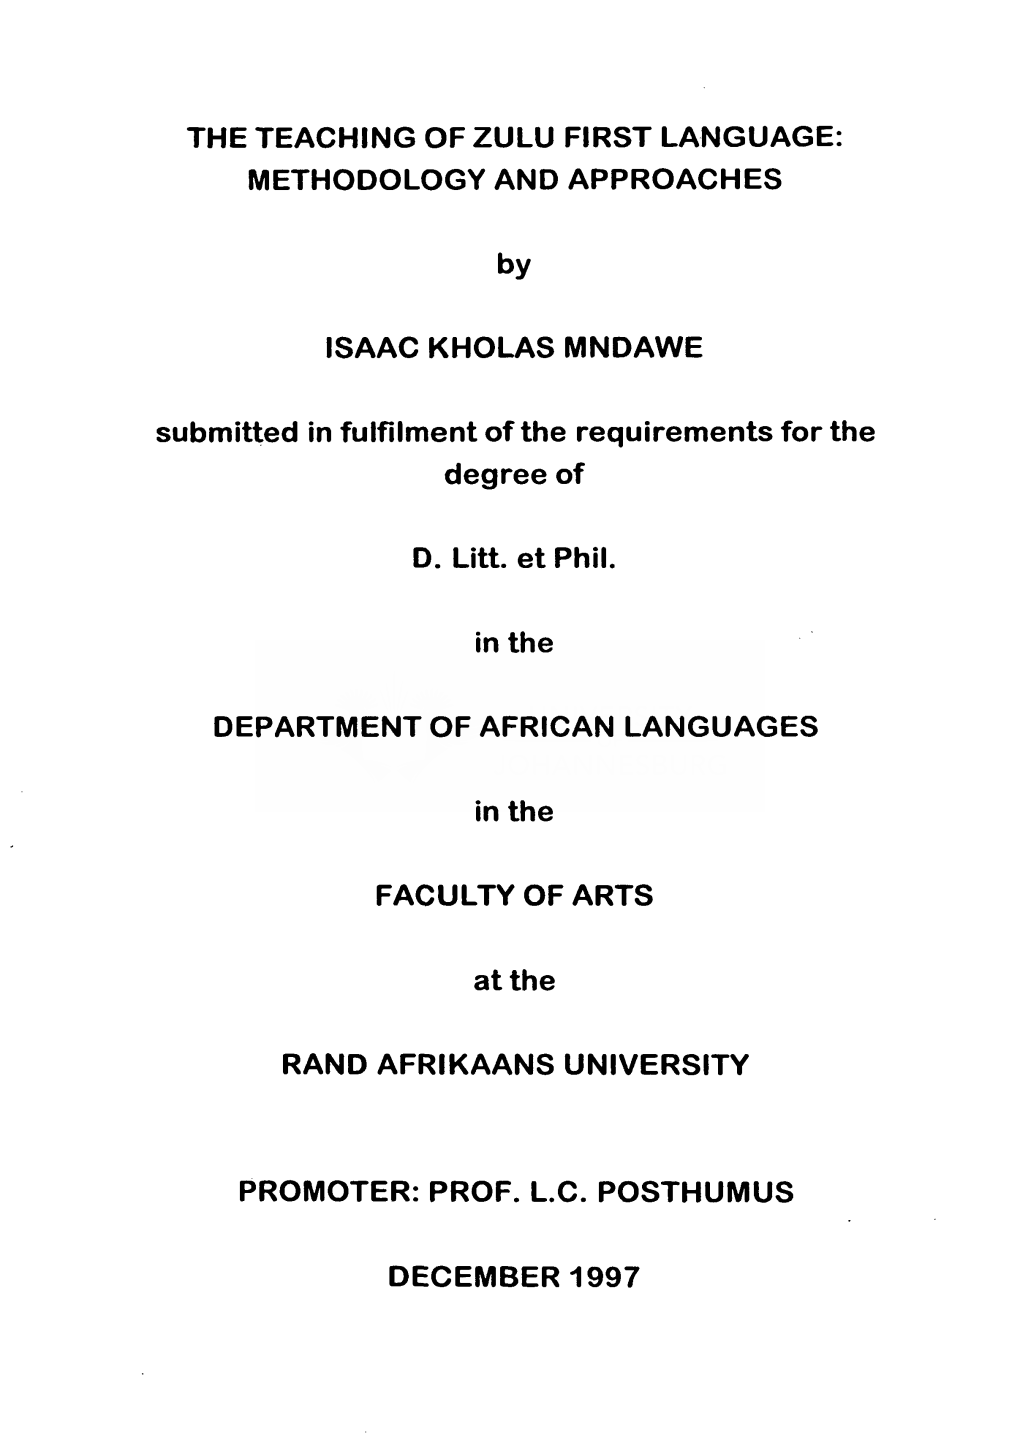 The Teaching of Zulu First Language : Methodology and Approaches